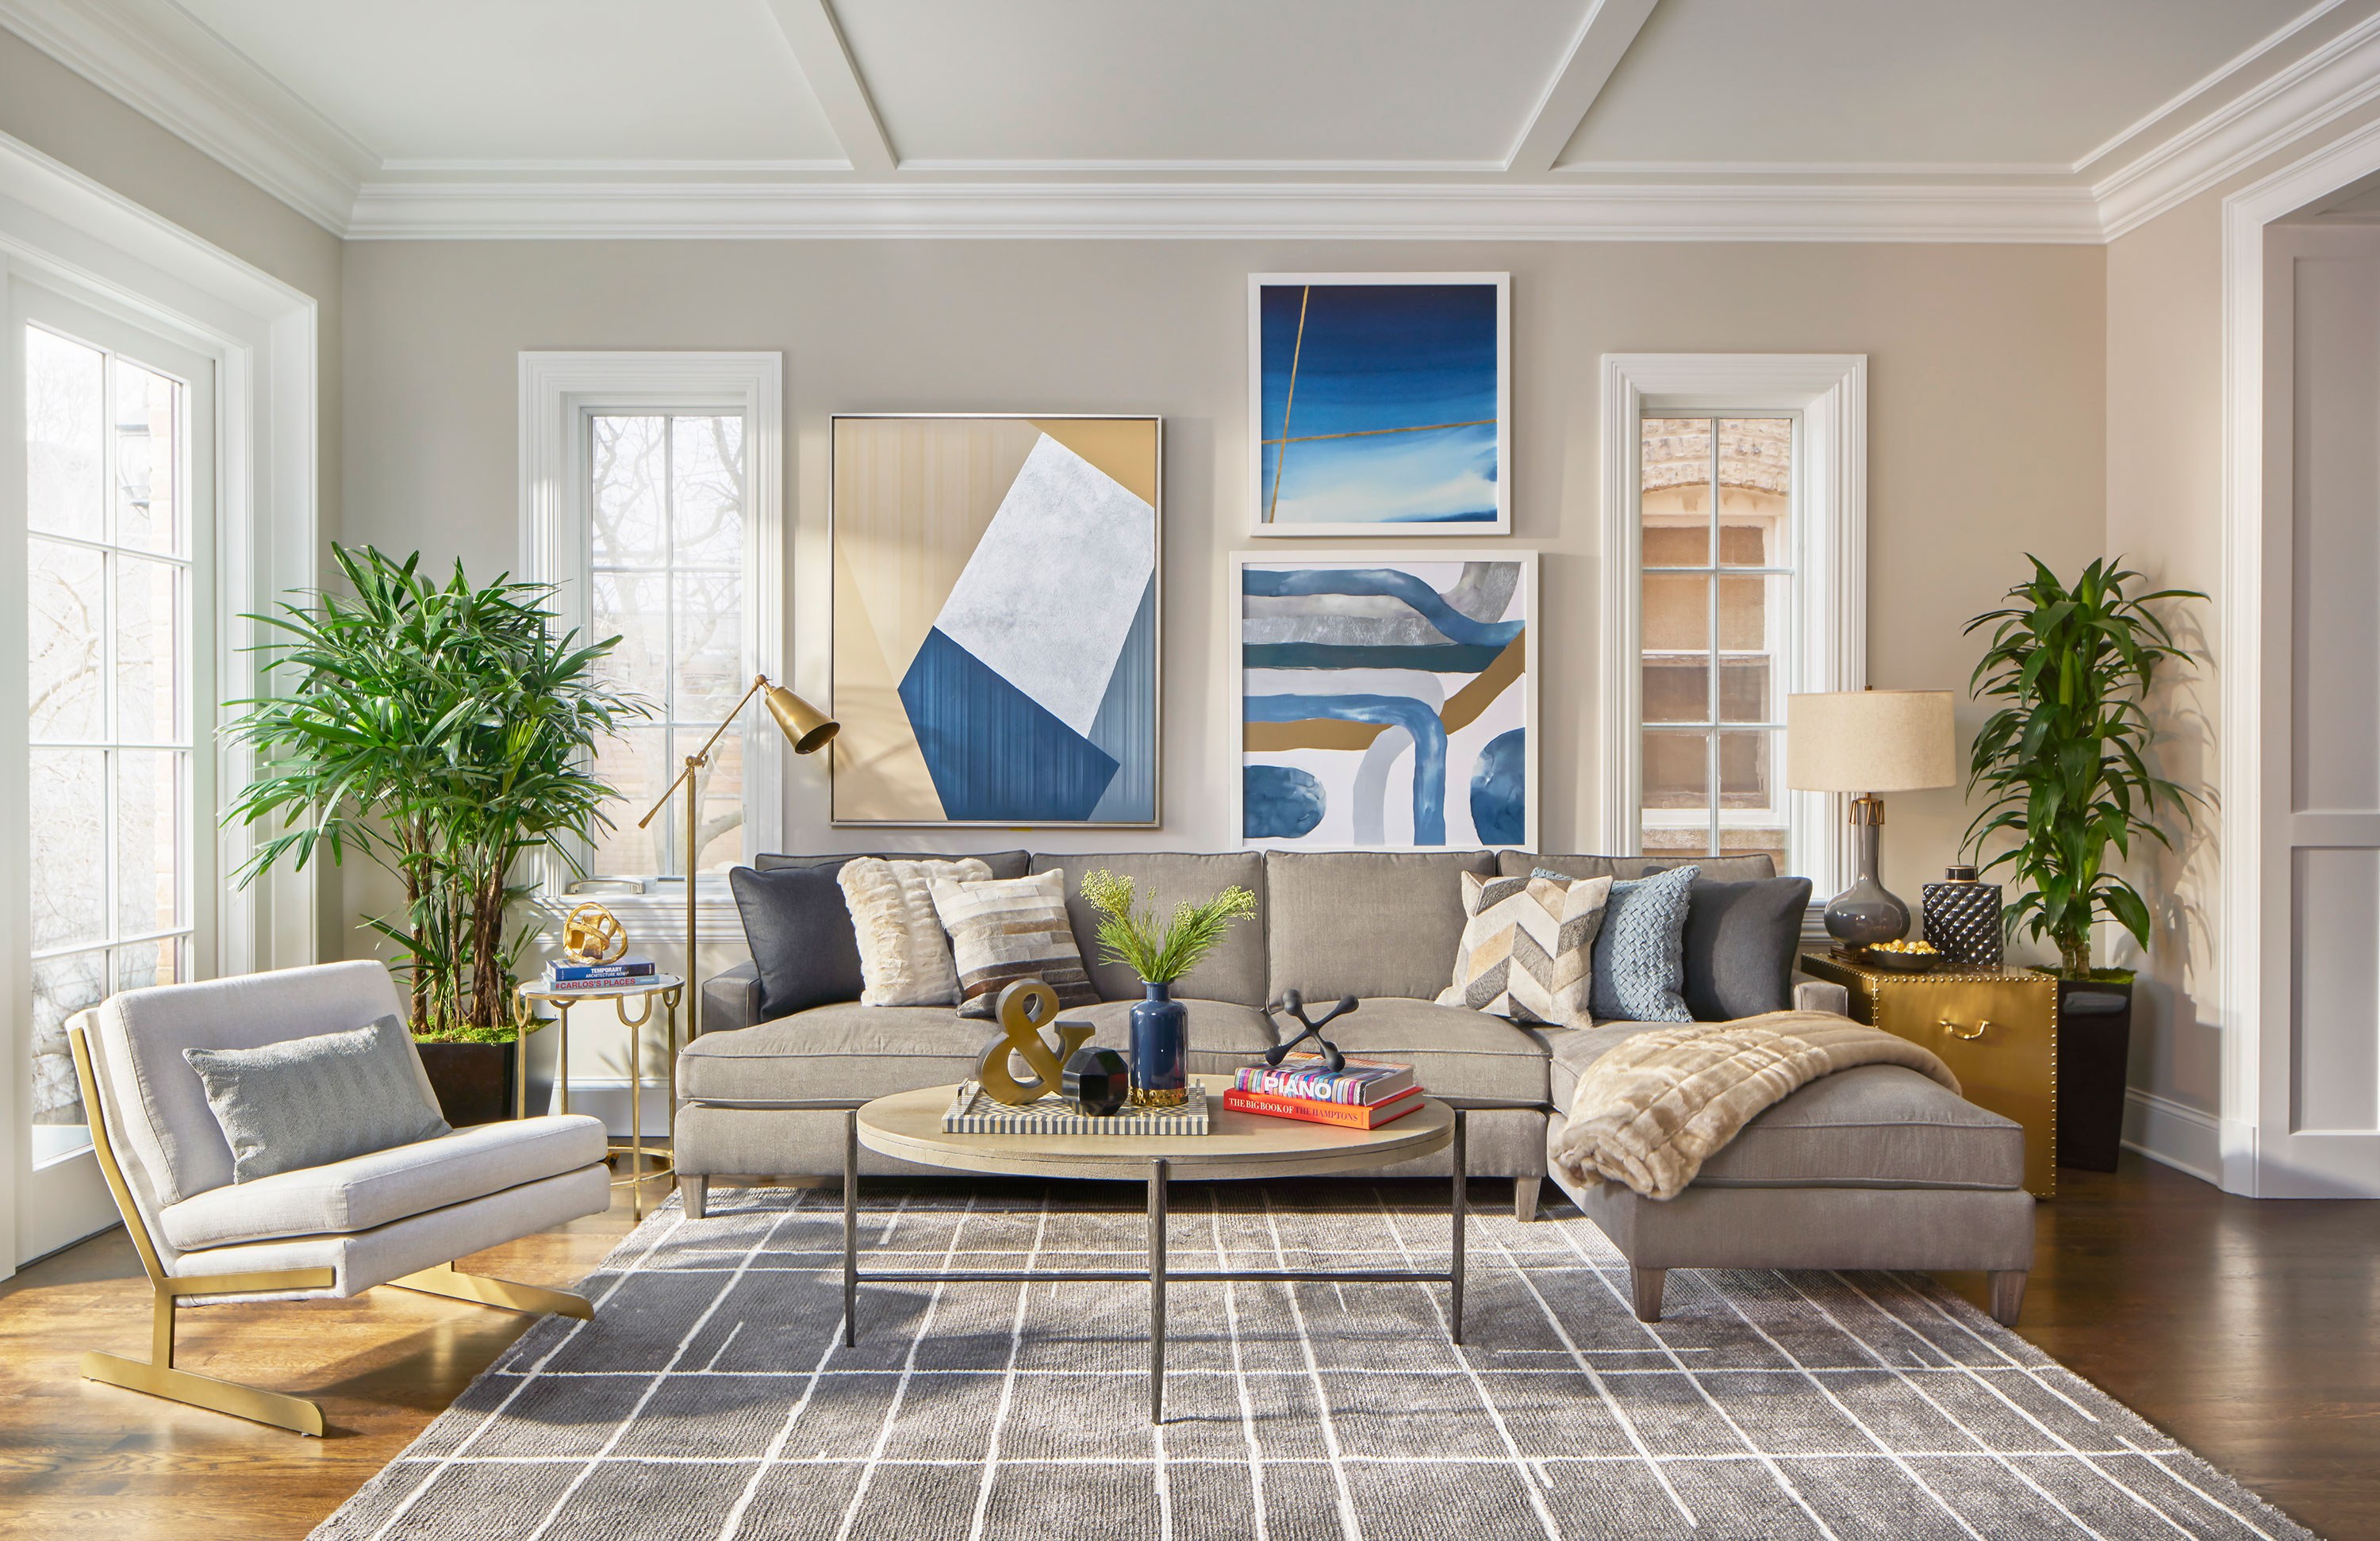 “Selecting artworks is subjective, but I choose to follow a general color scheme. Art should complement the room and furniture without appearing too matchy.”